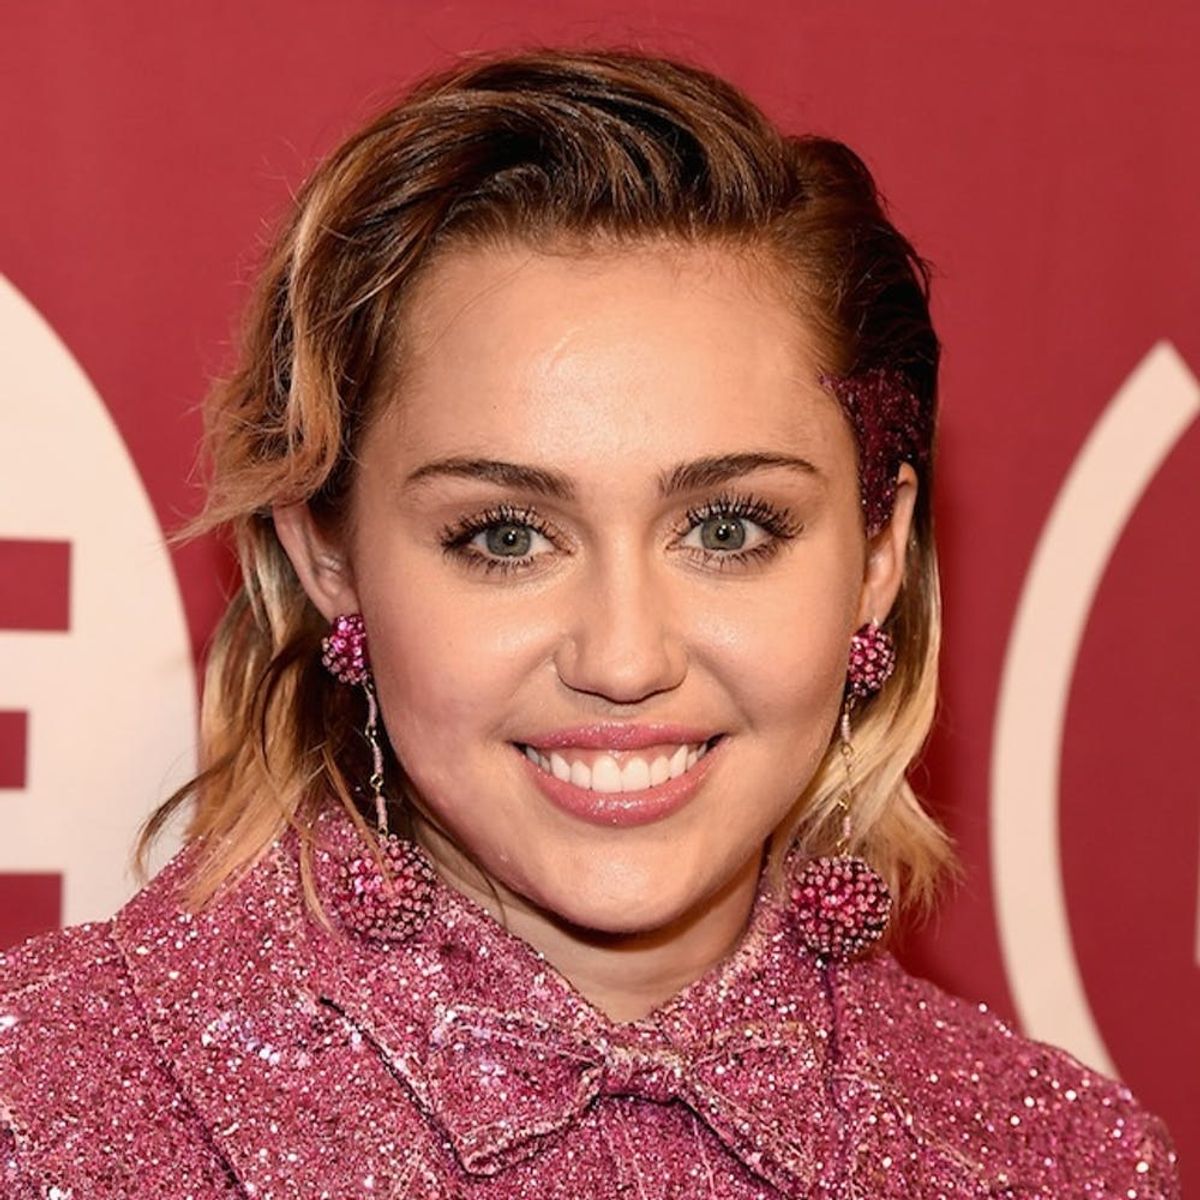 Get the Look of Miley Cyrus’s Tuscan-Inspired Villa